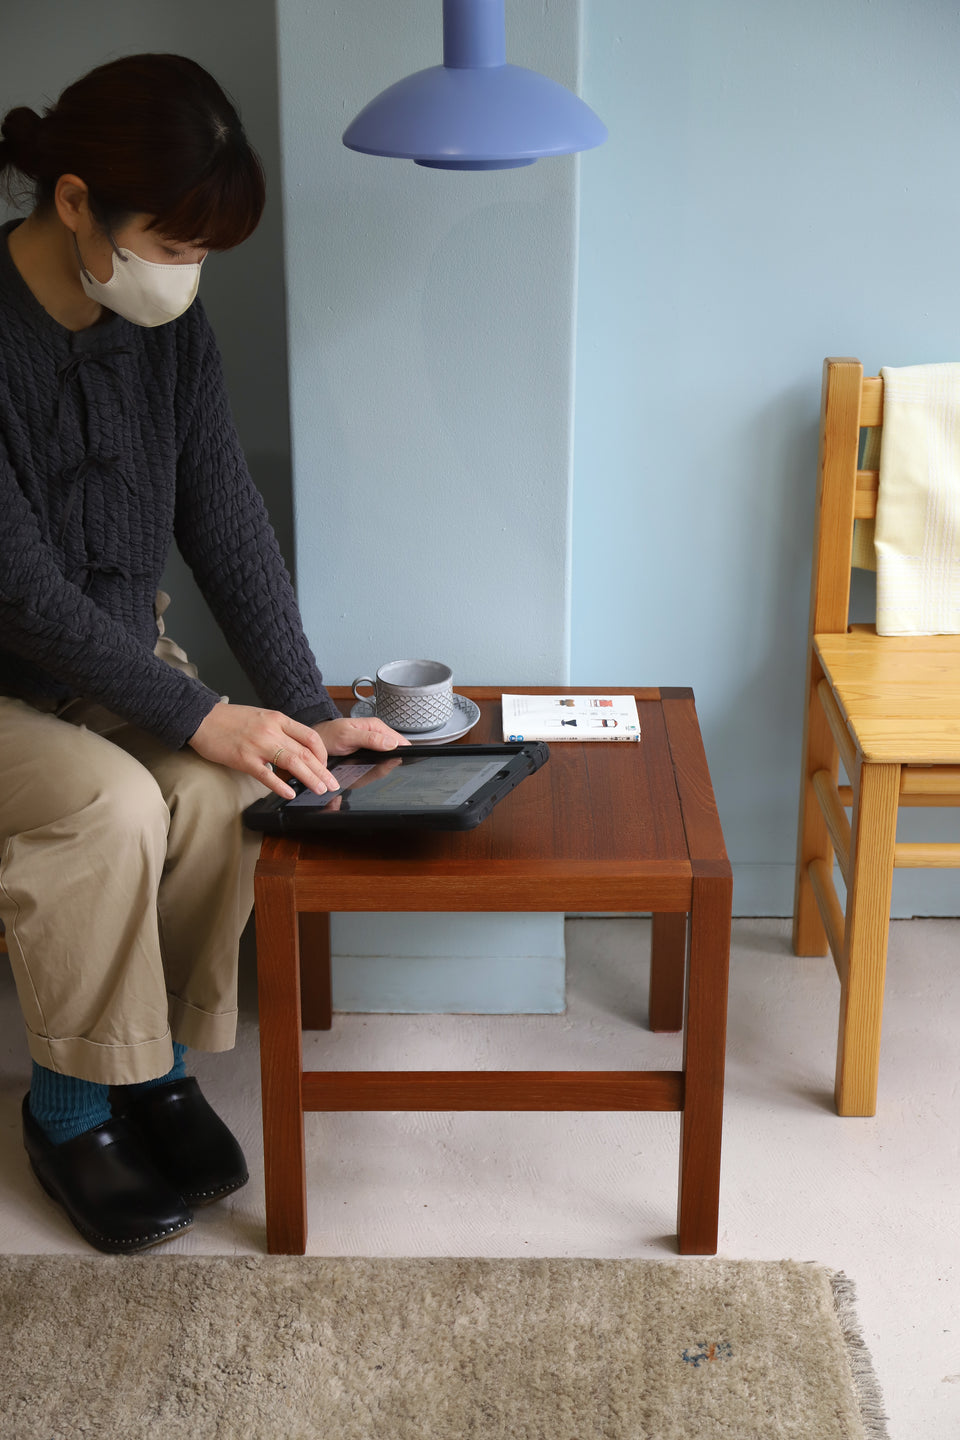 Japanese Vintage Side Table Teakwood/ジャパンヴィンテージ サイドテーブル チーク材 北欧スタイル